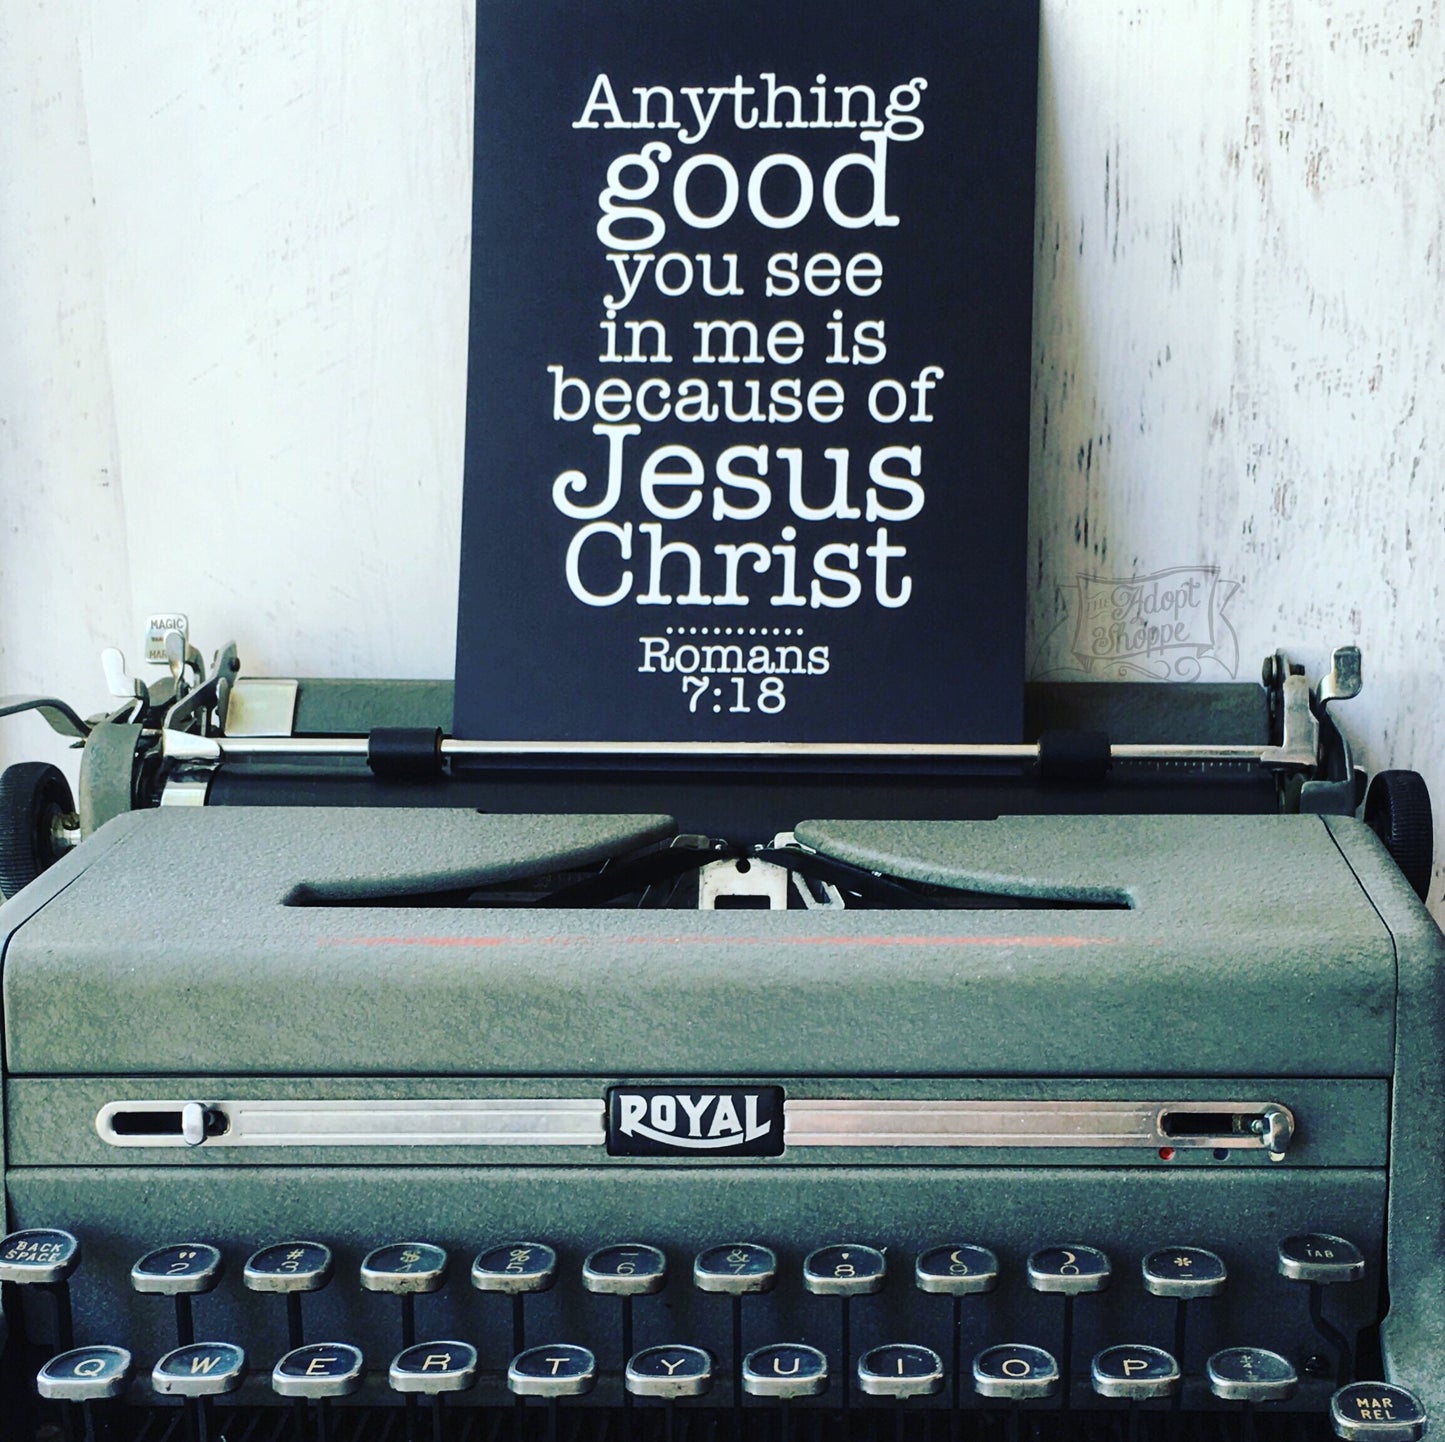 anything good you see in me is because of Jesus 5"x7" print